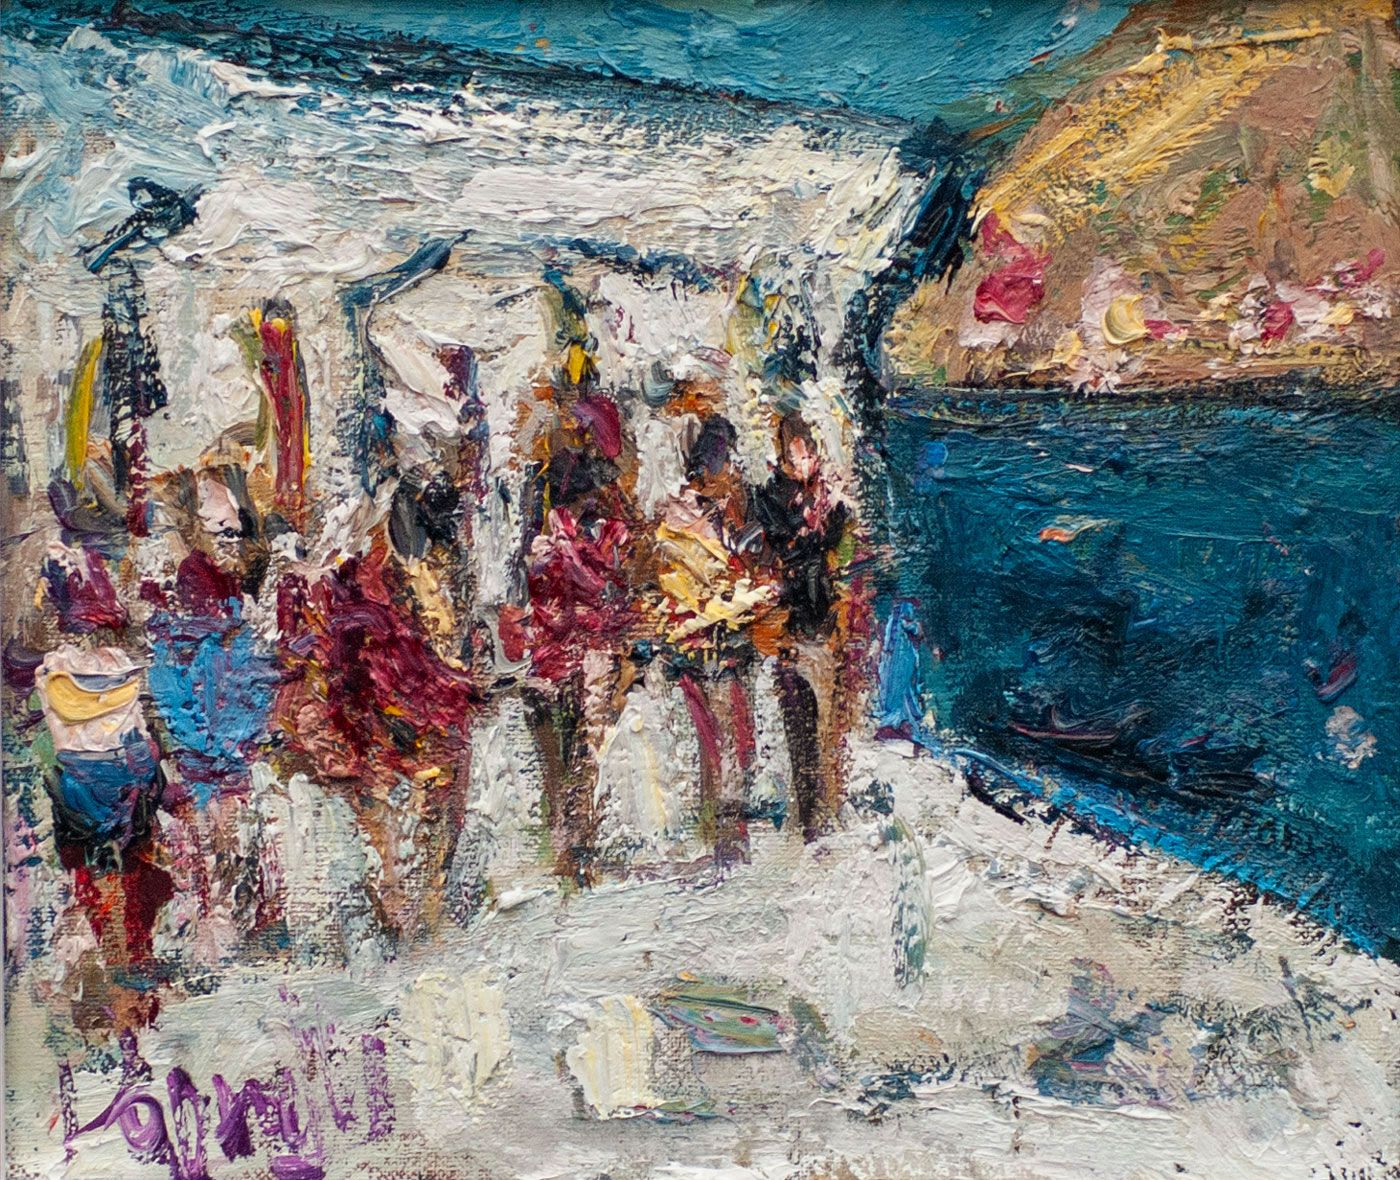 Swimmers in Sandycove by Deborah Donnelly